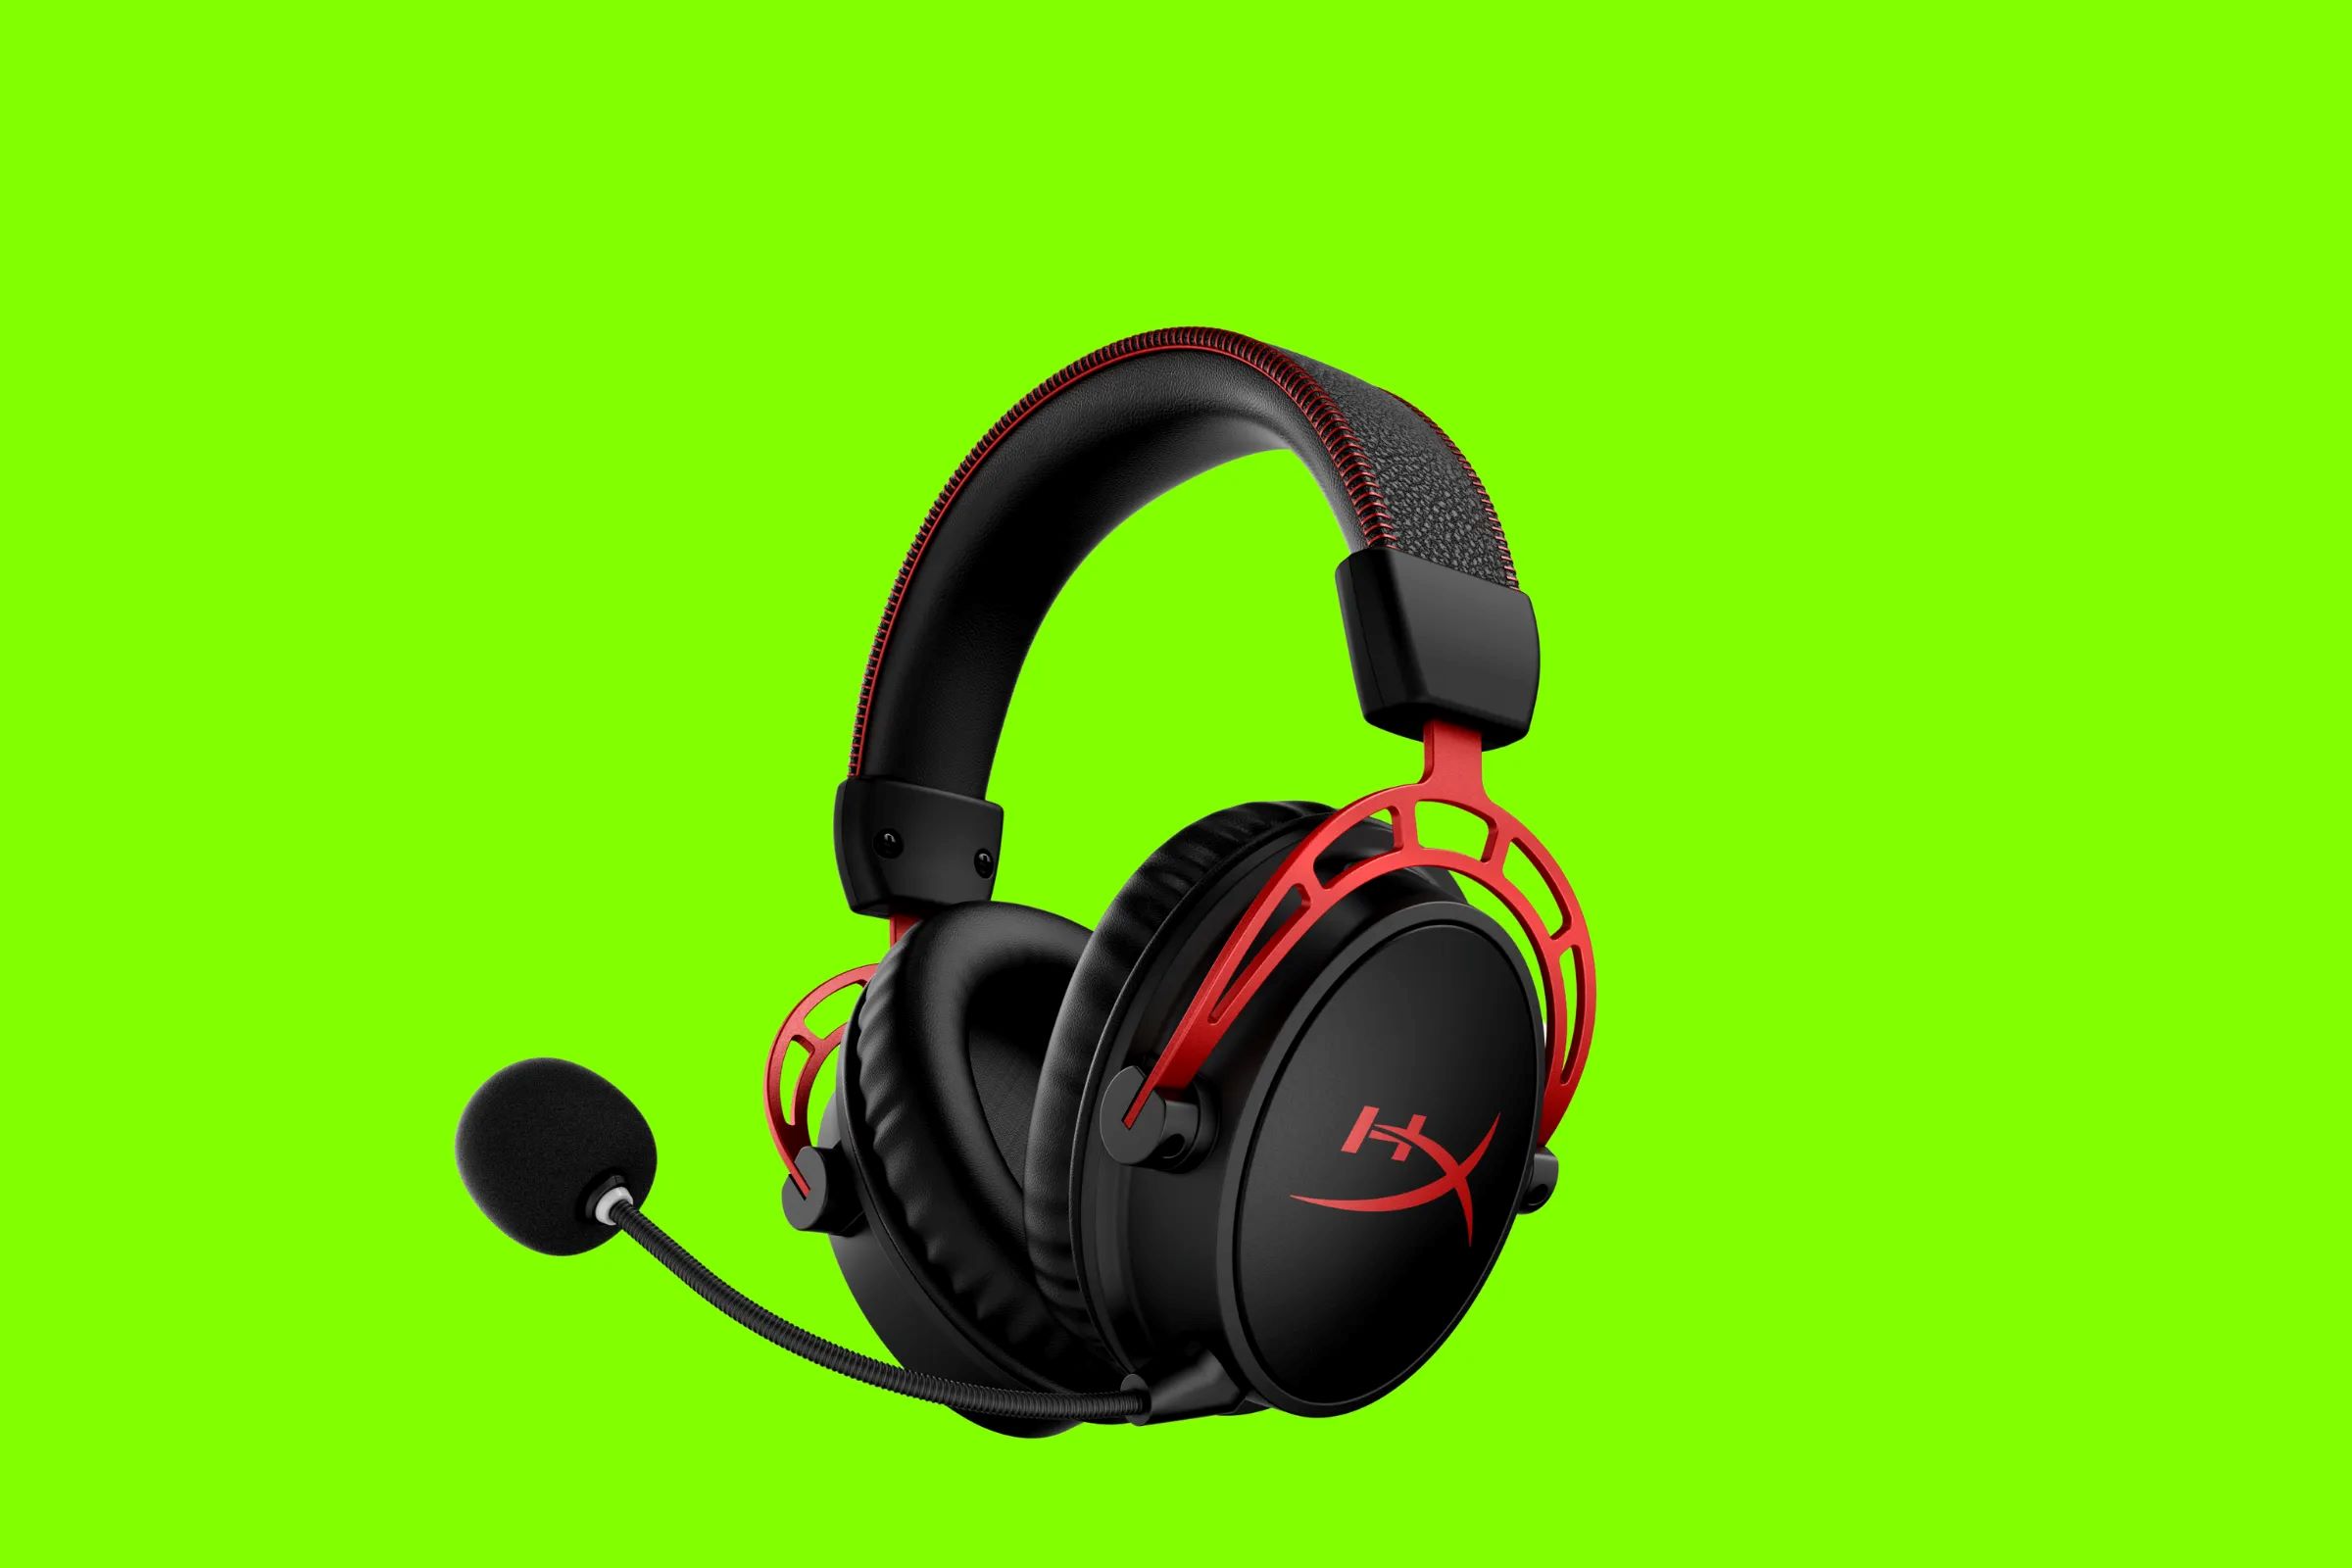 How To The Best Use Of The HyperX Cloud Gaming Headset For PC